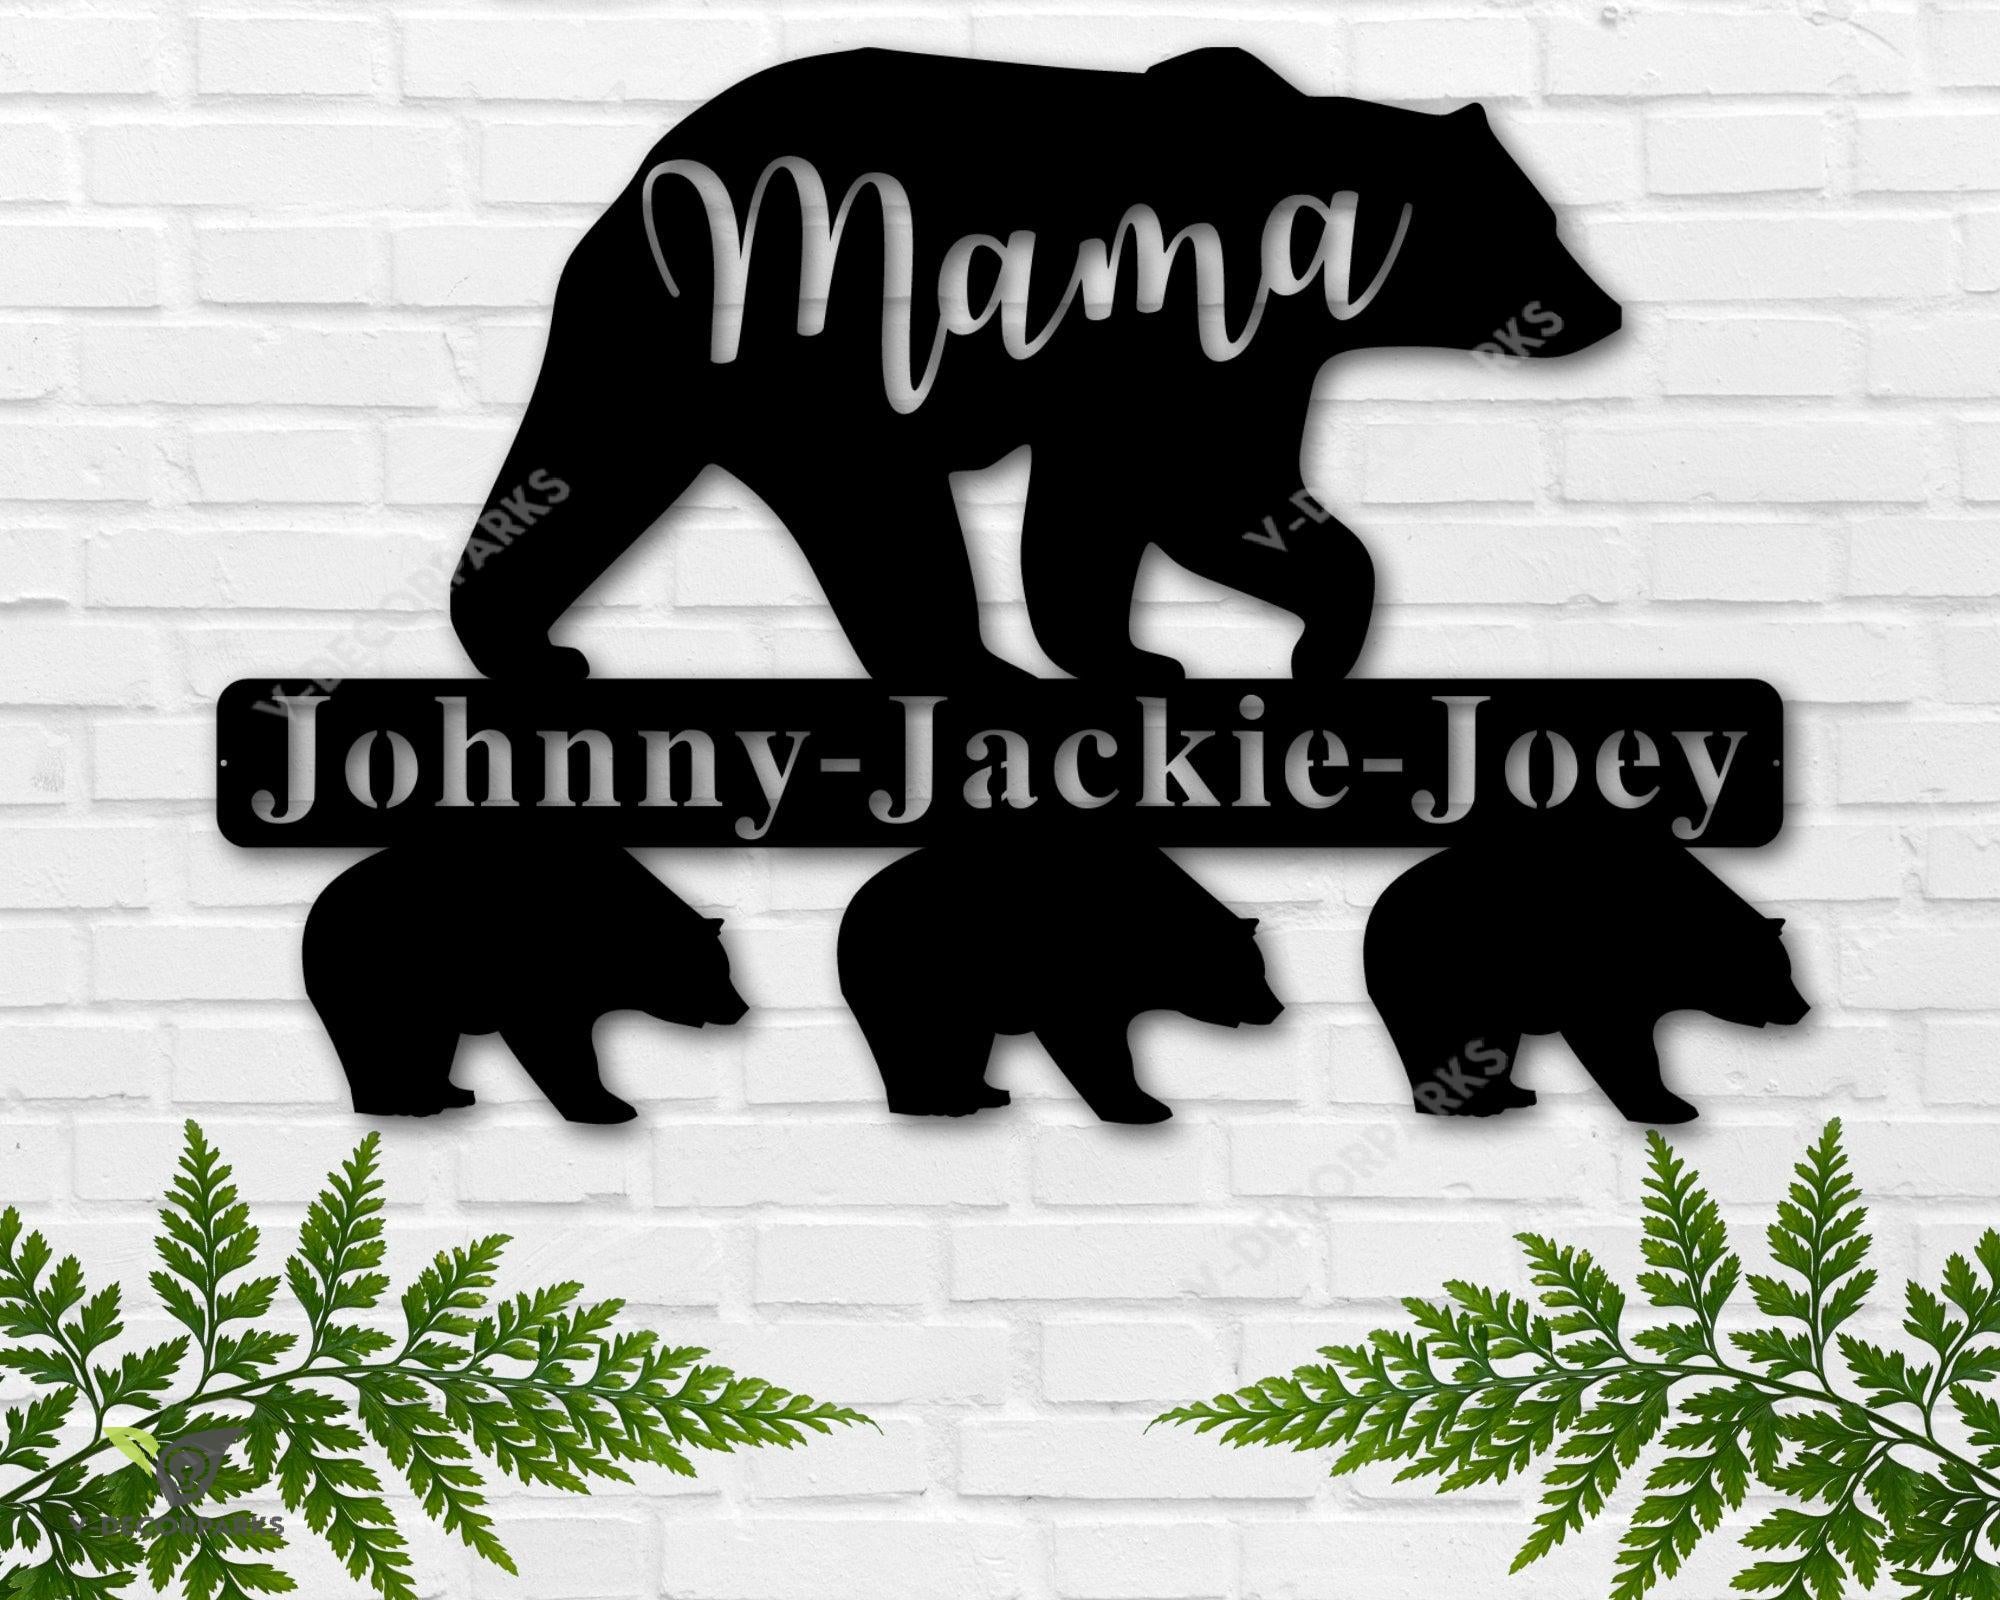 Mama Bear Metal Sign, Personalized Mothers Day Gift, Bear Cubs Sign, Custom Mothers Day Sign, Gift For Mom, Gift From Kids, Kitchen Decor